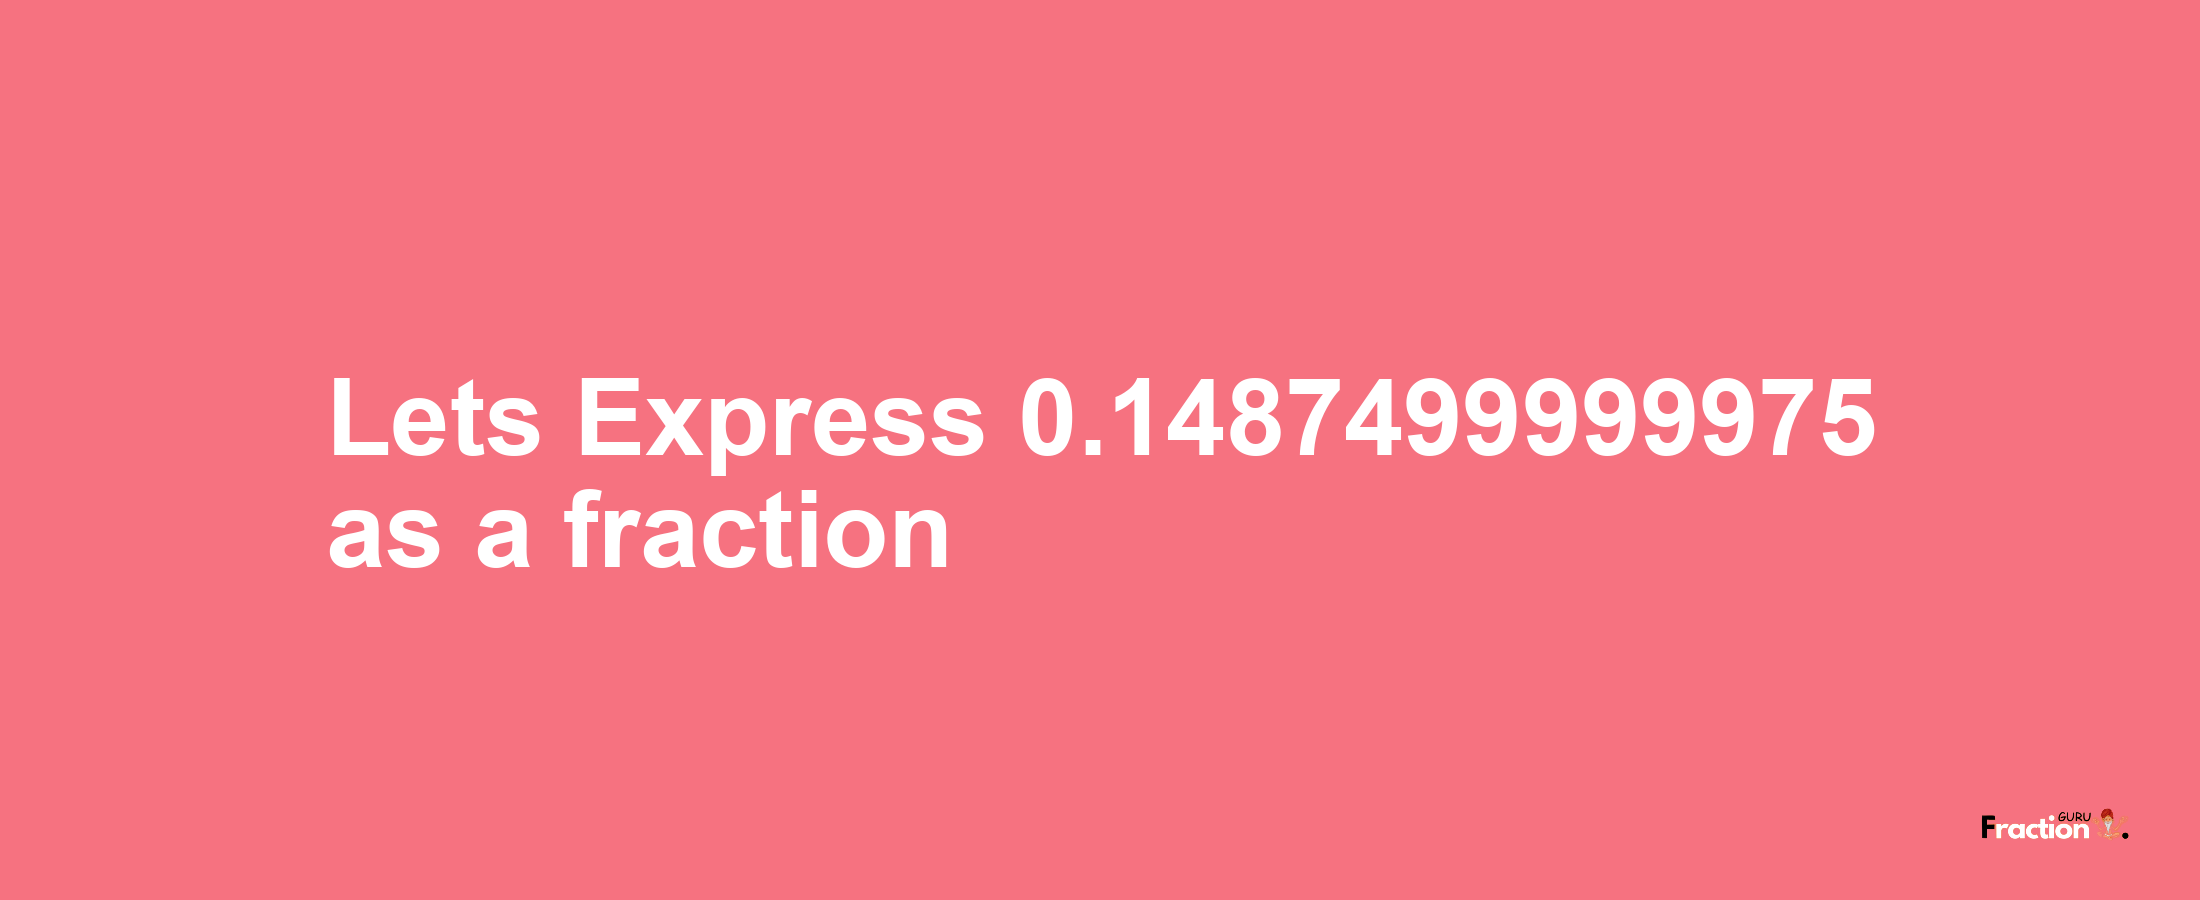 Lets Express 0.1487499999975 as afraction